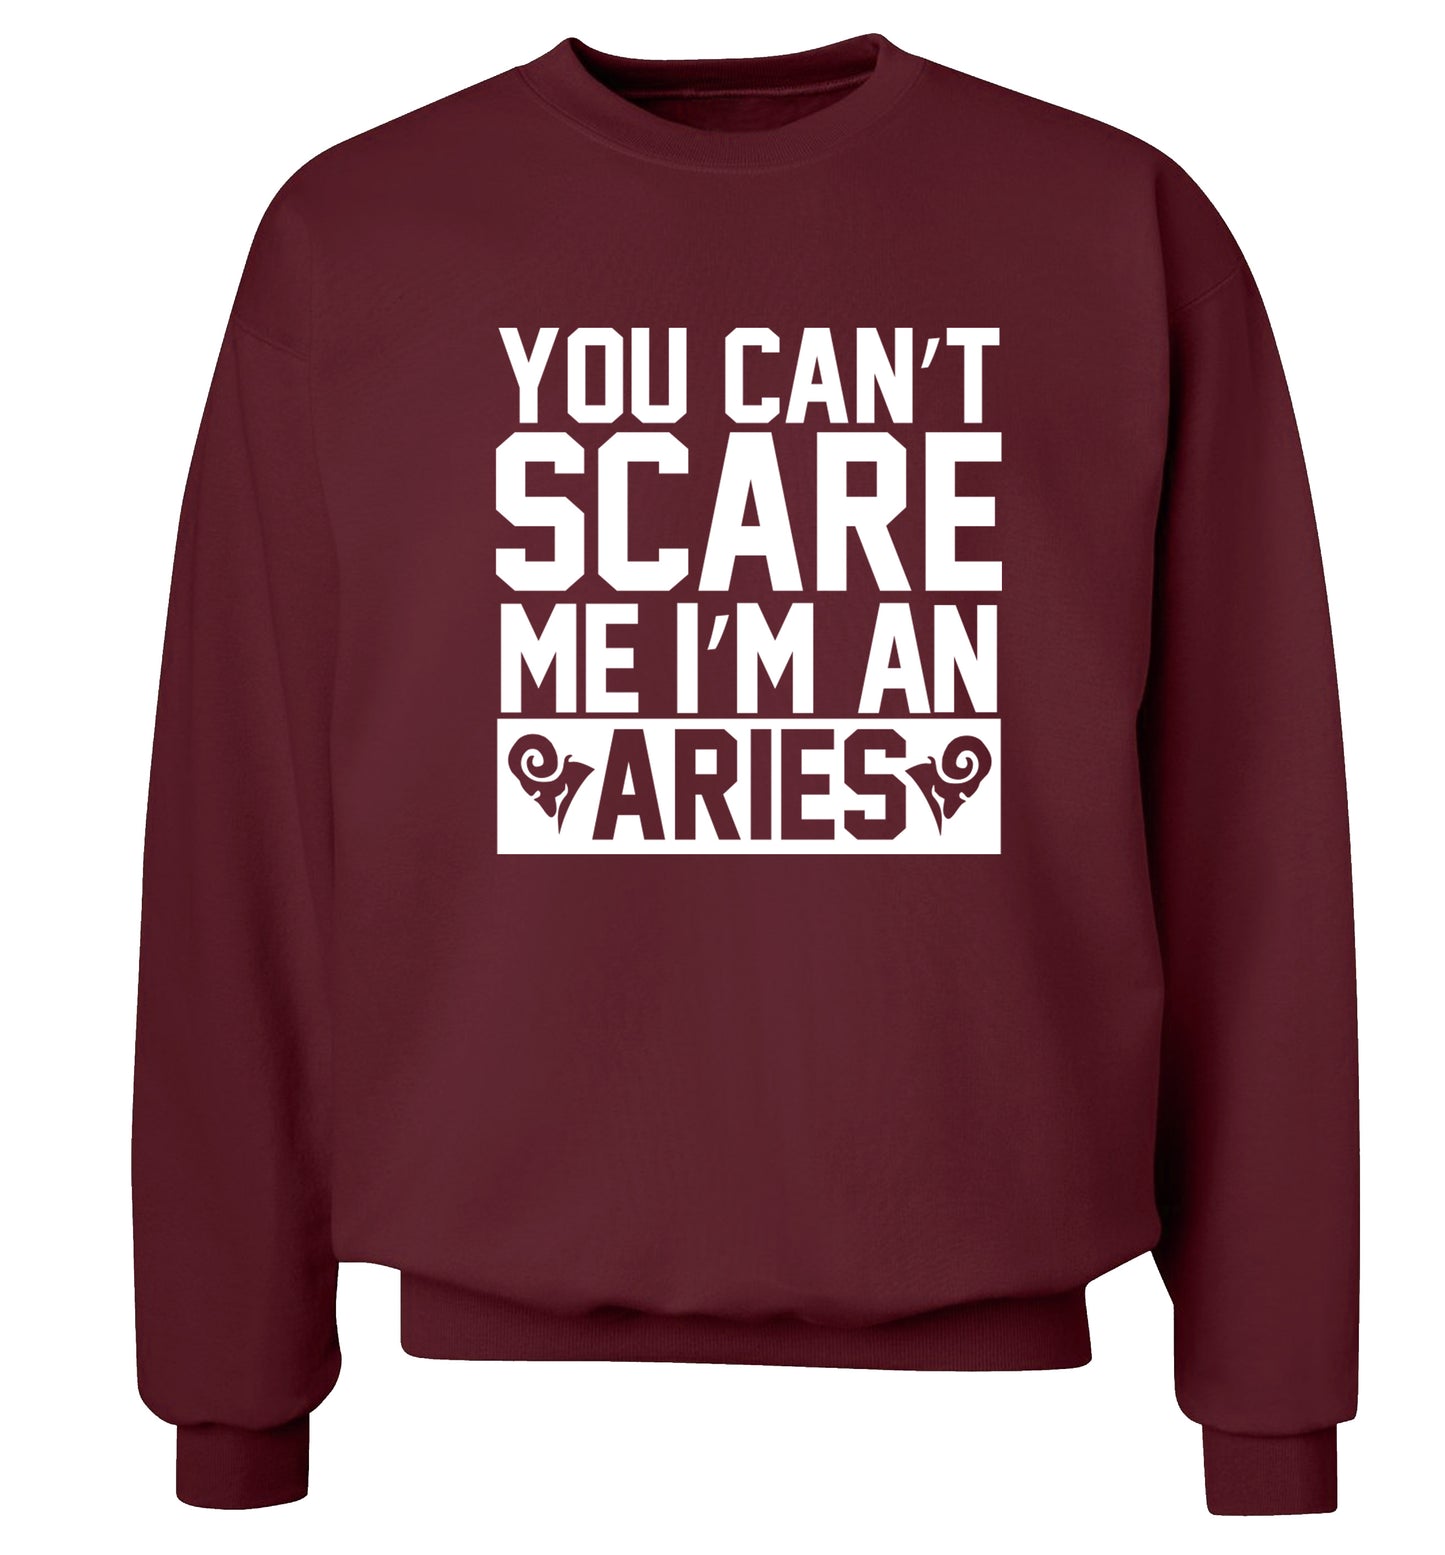 You can't scare me I'm an aries Adult's unisex maroon Sweater 2XL